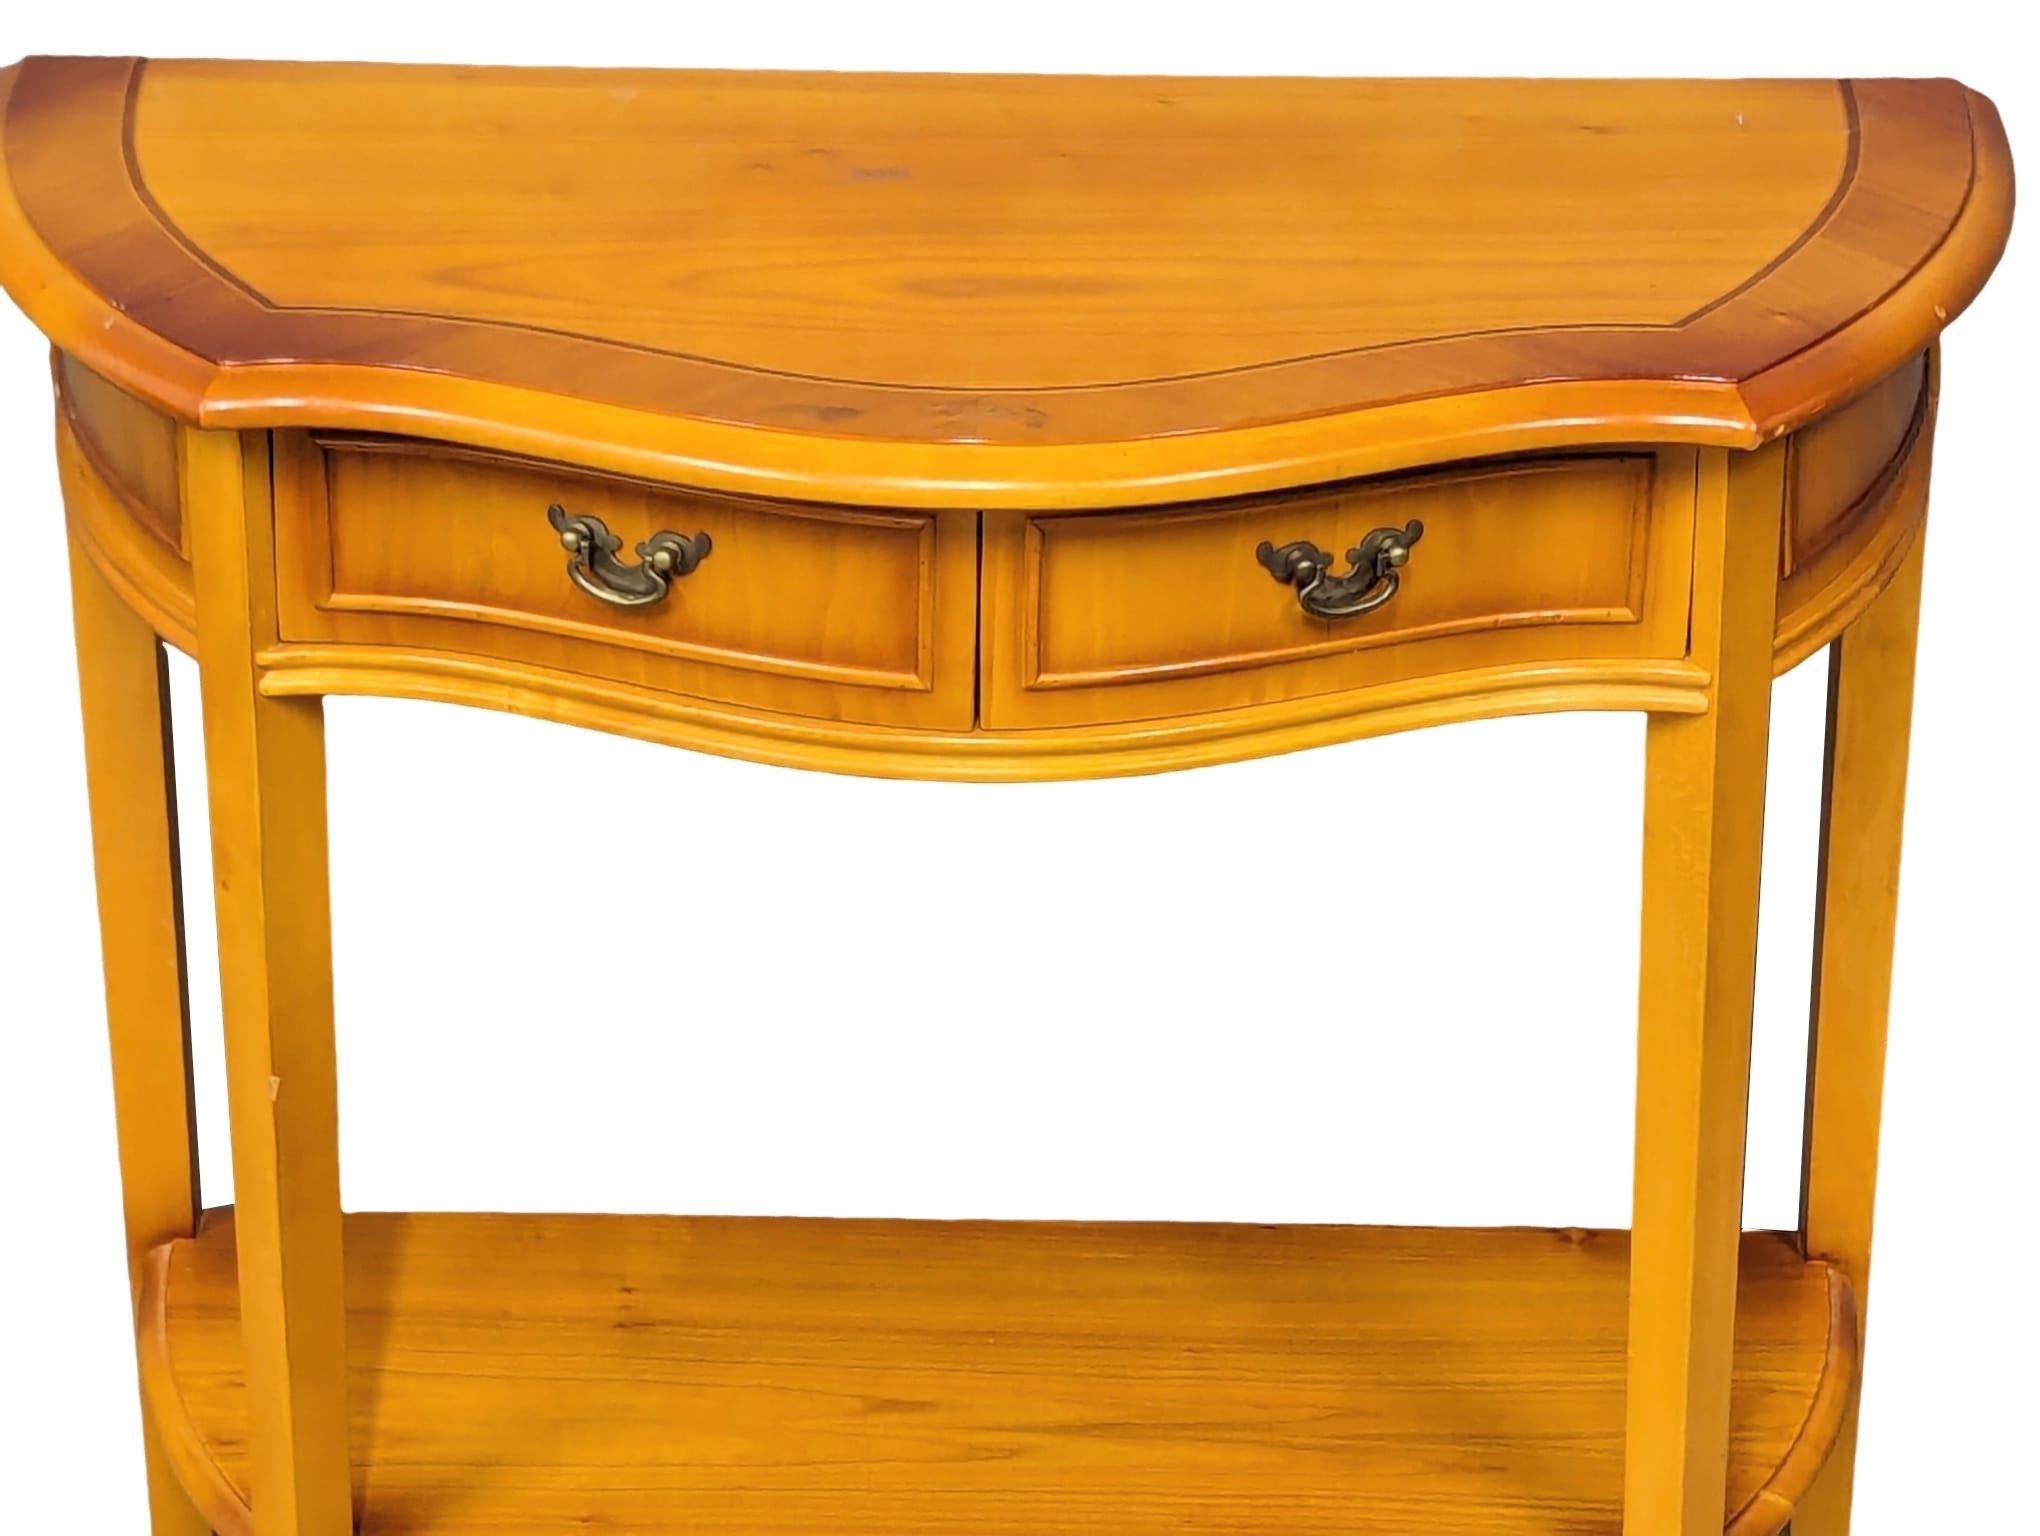 A yew wood Serpentine front hall table with 2 drawers. 72x35x75xm - Image 4 of 4